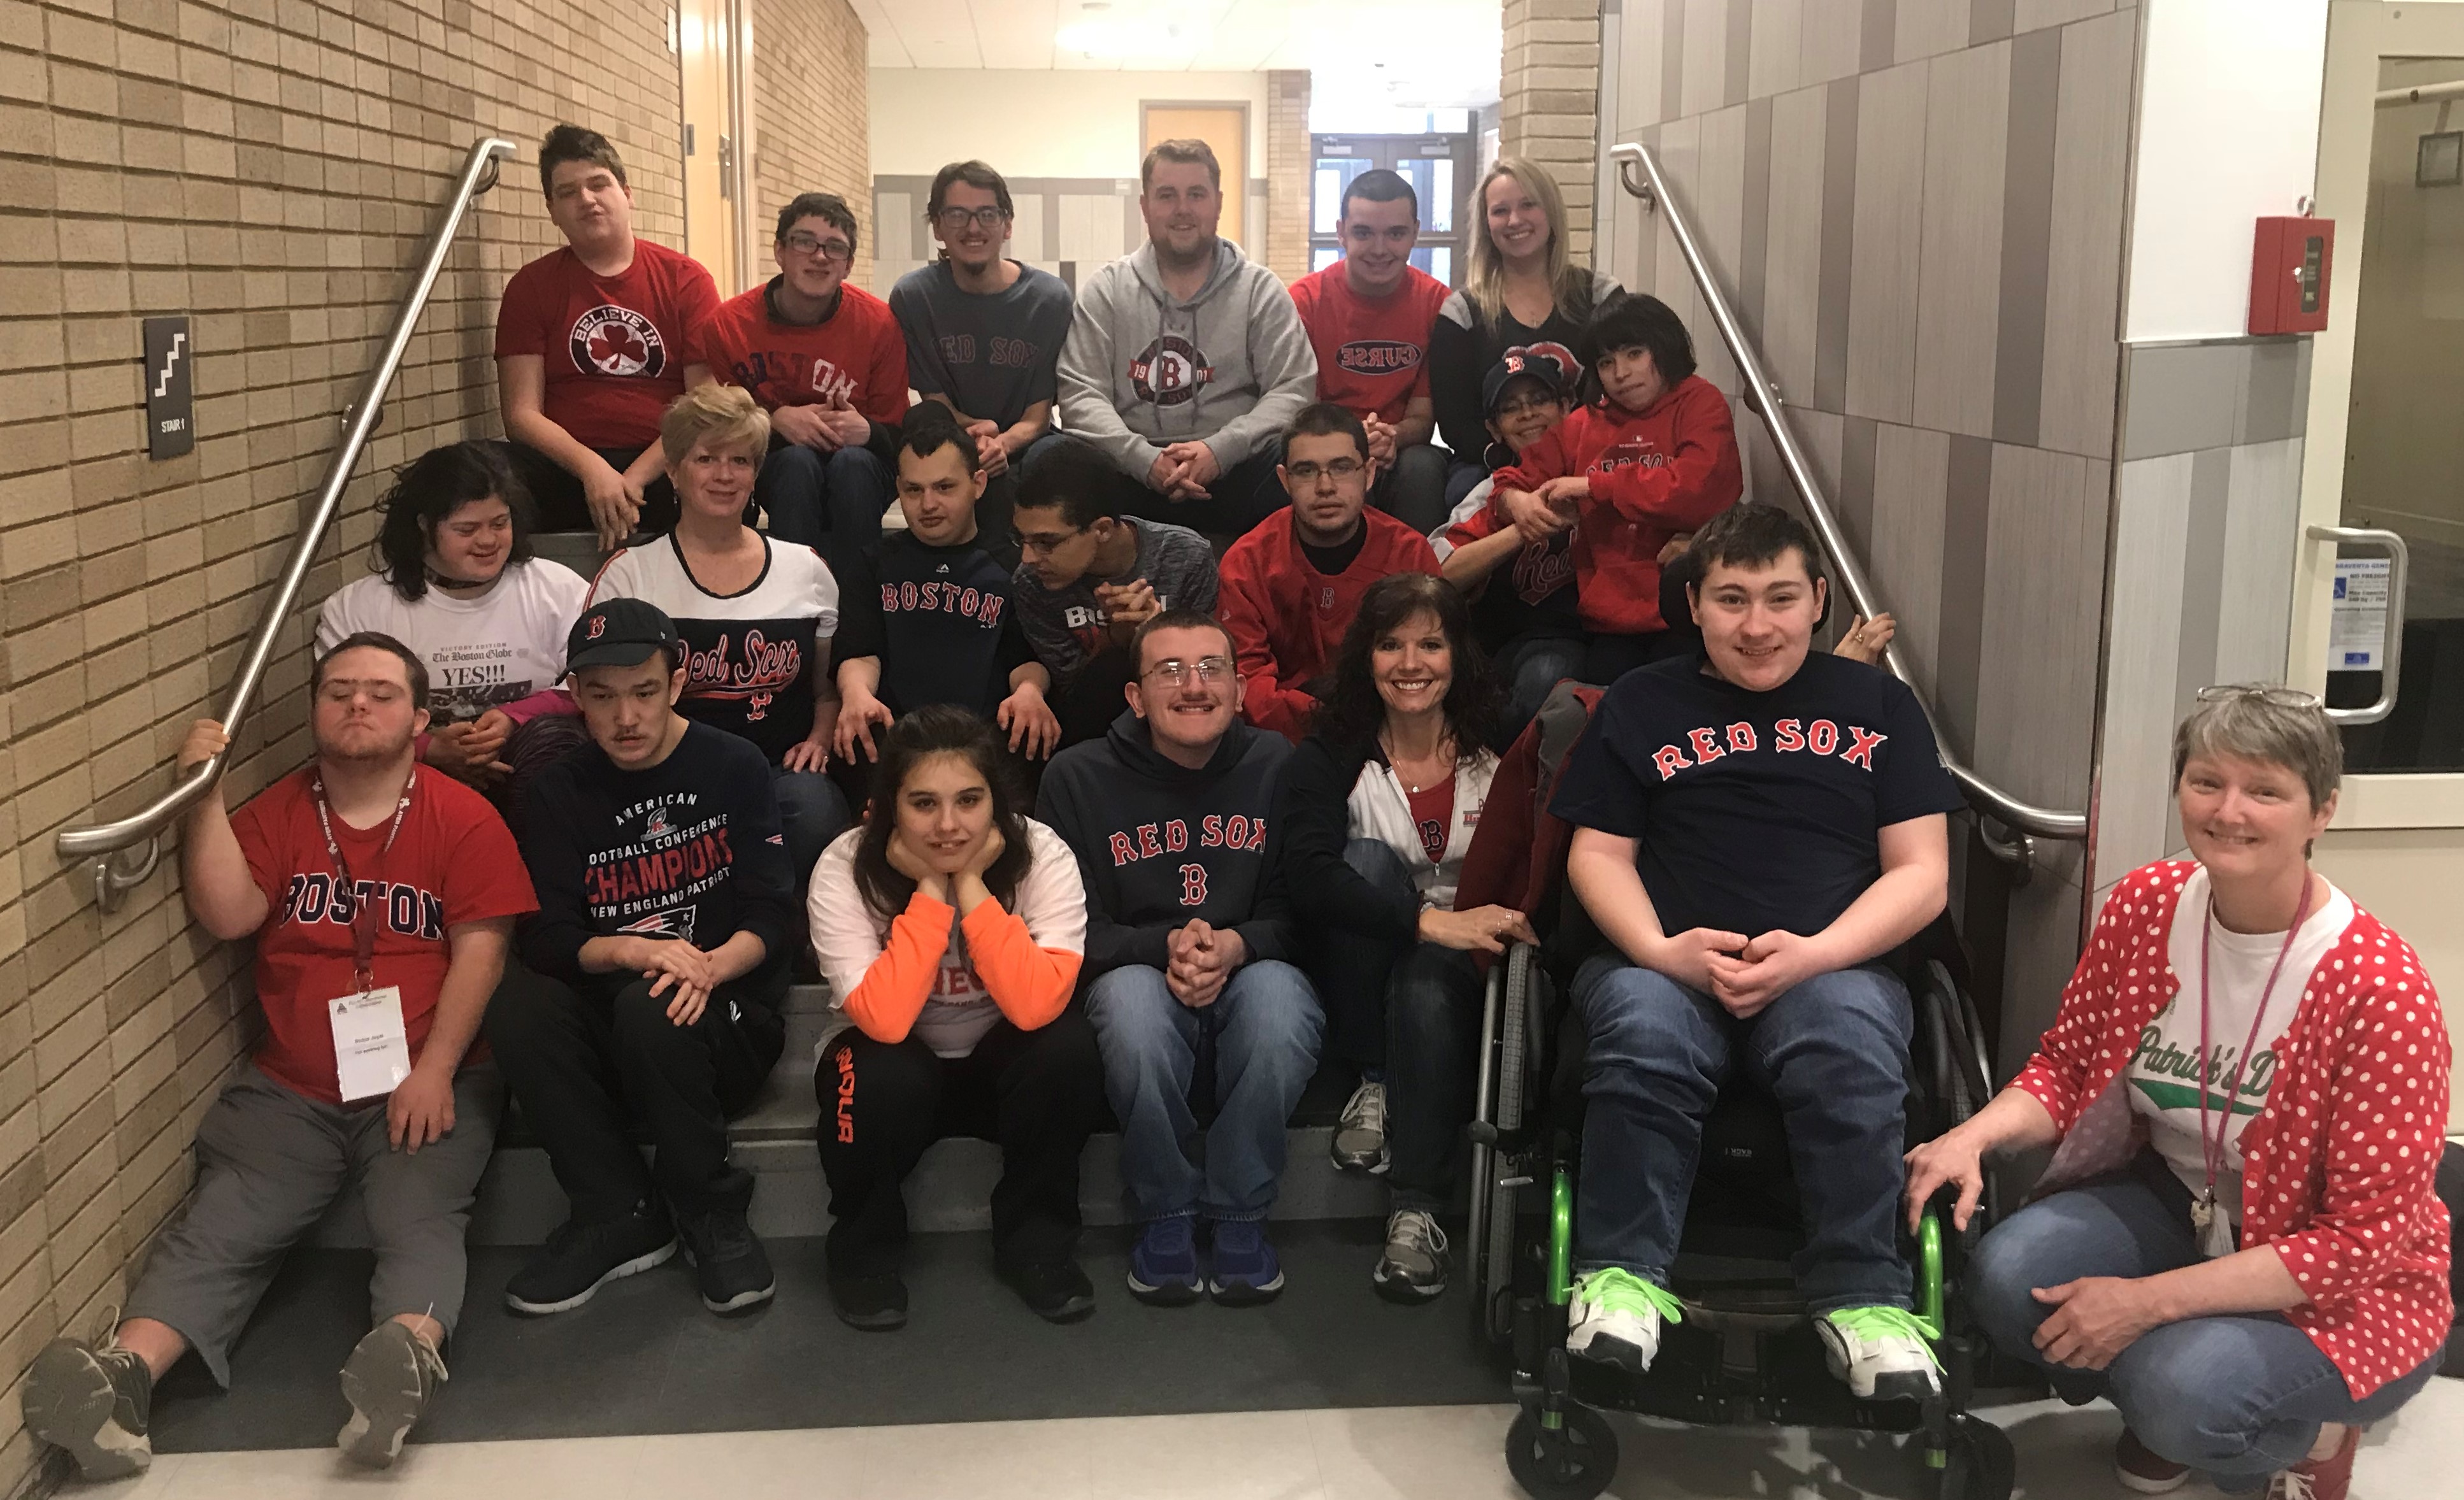 Students dressed in Red Sox's shirts for opening day.